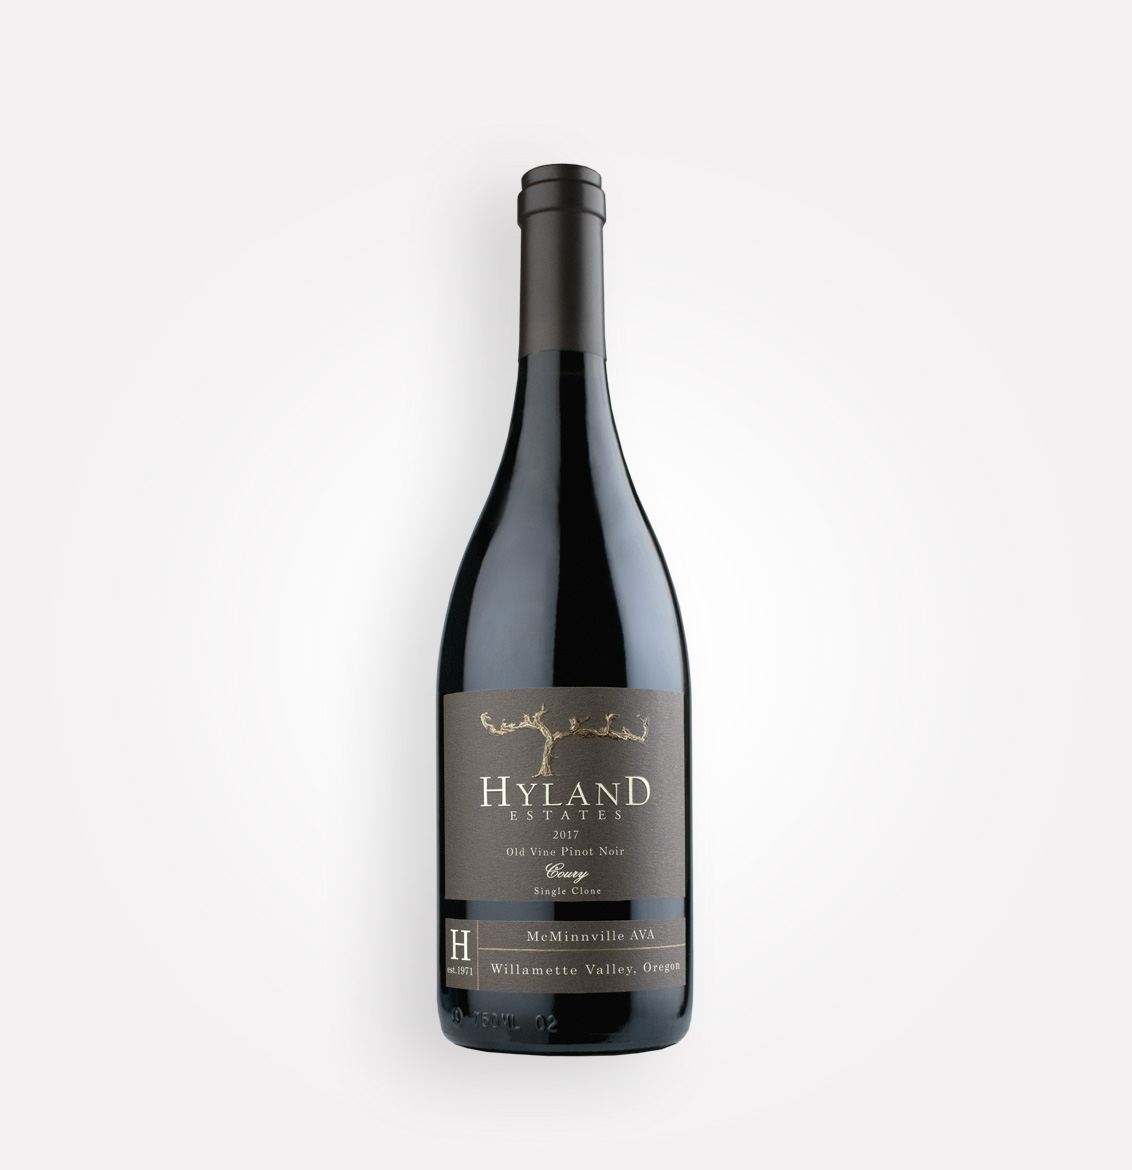 Bottle of Hyland Estates 2017 Old Vine Pinot Noir Coury Single Clone wine from Oregon's McMinnville AVA in the Willamette Valley